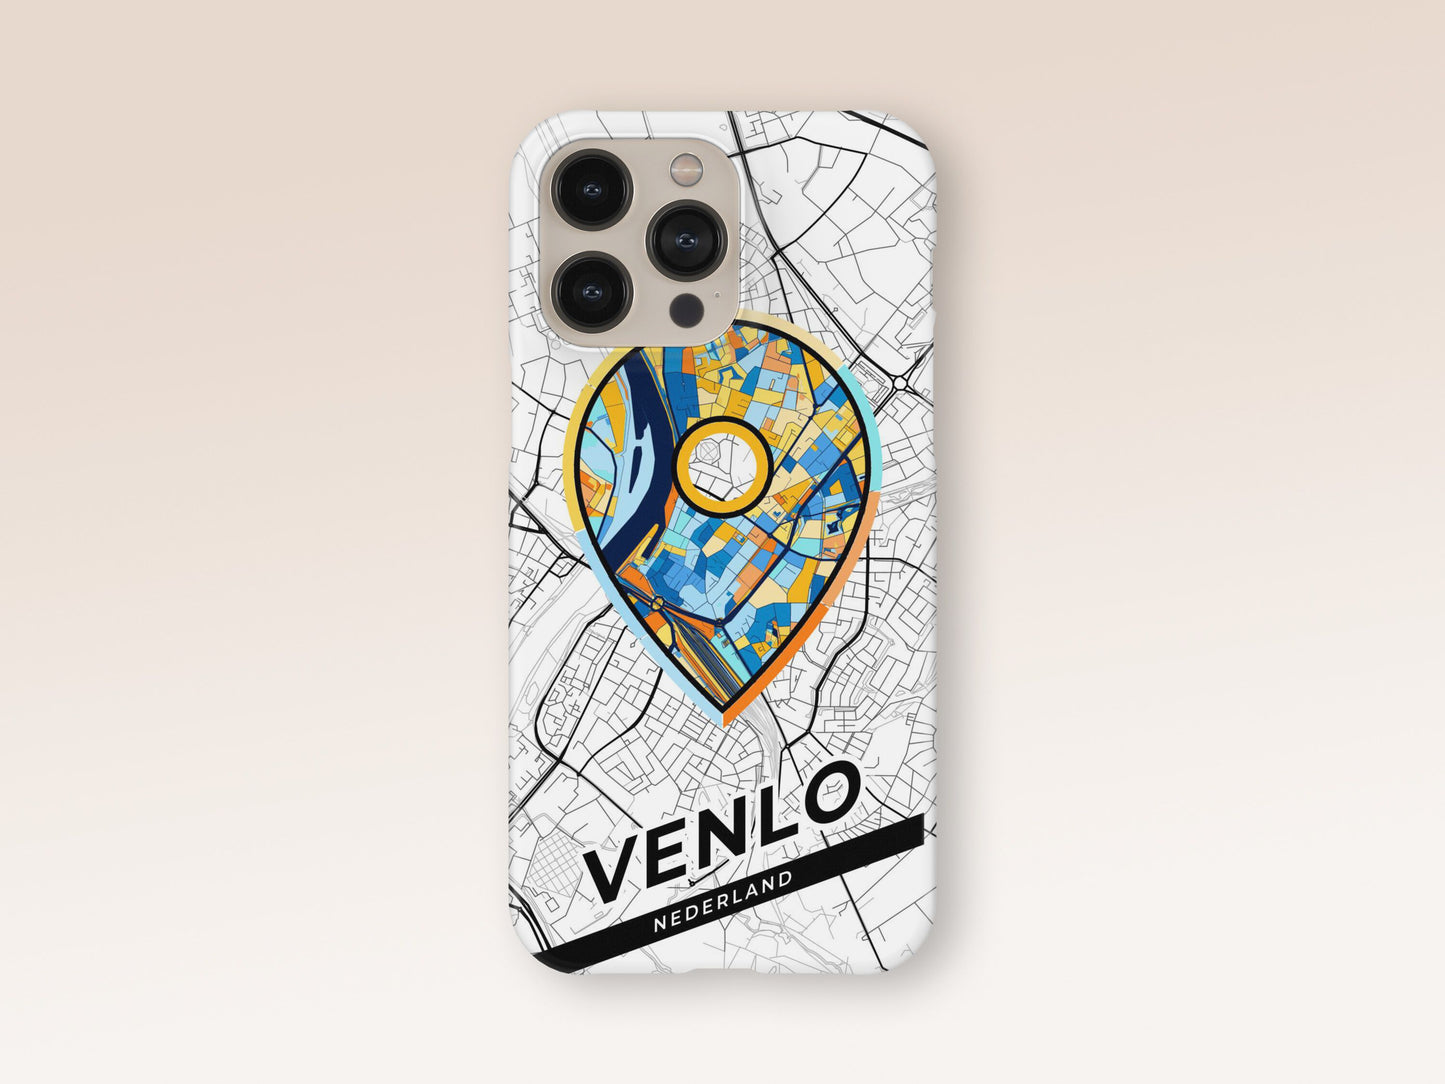 Venlo Netherlands slim phone case with colorful icon 1